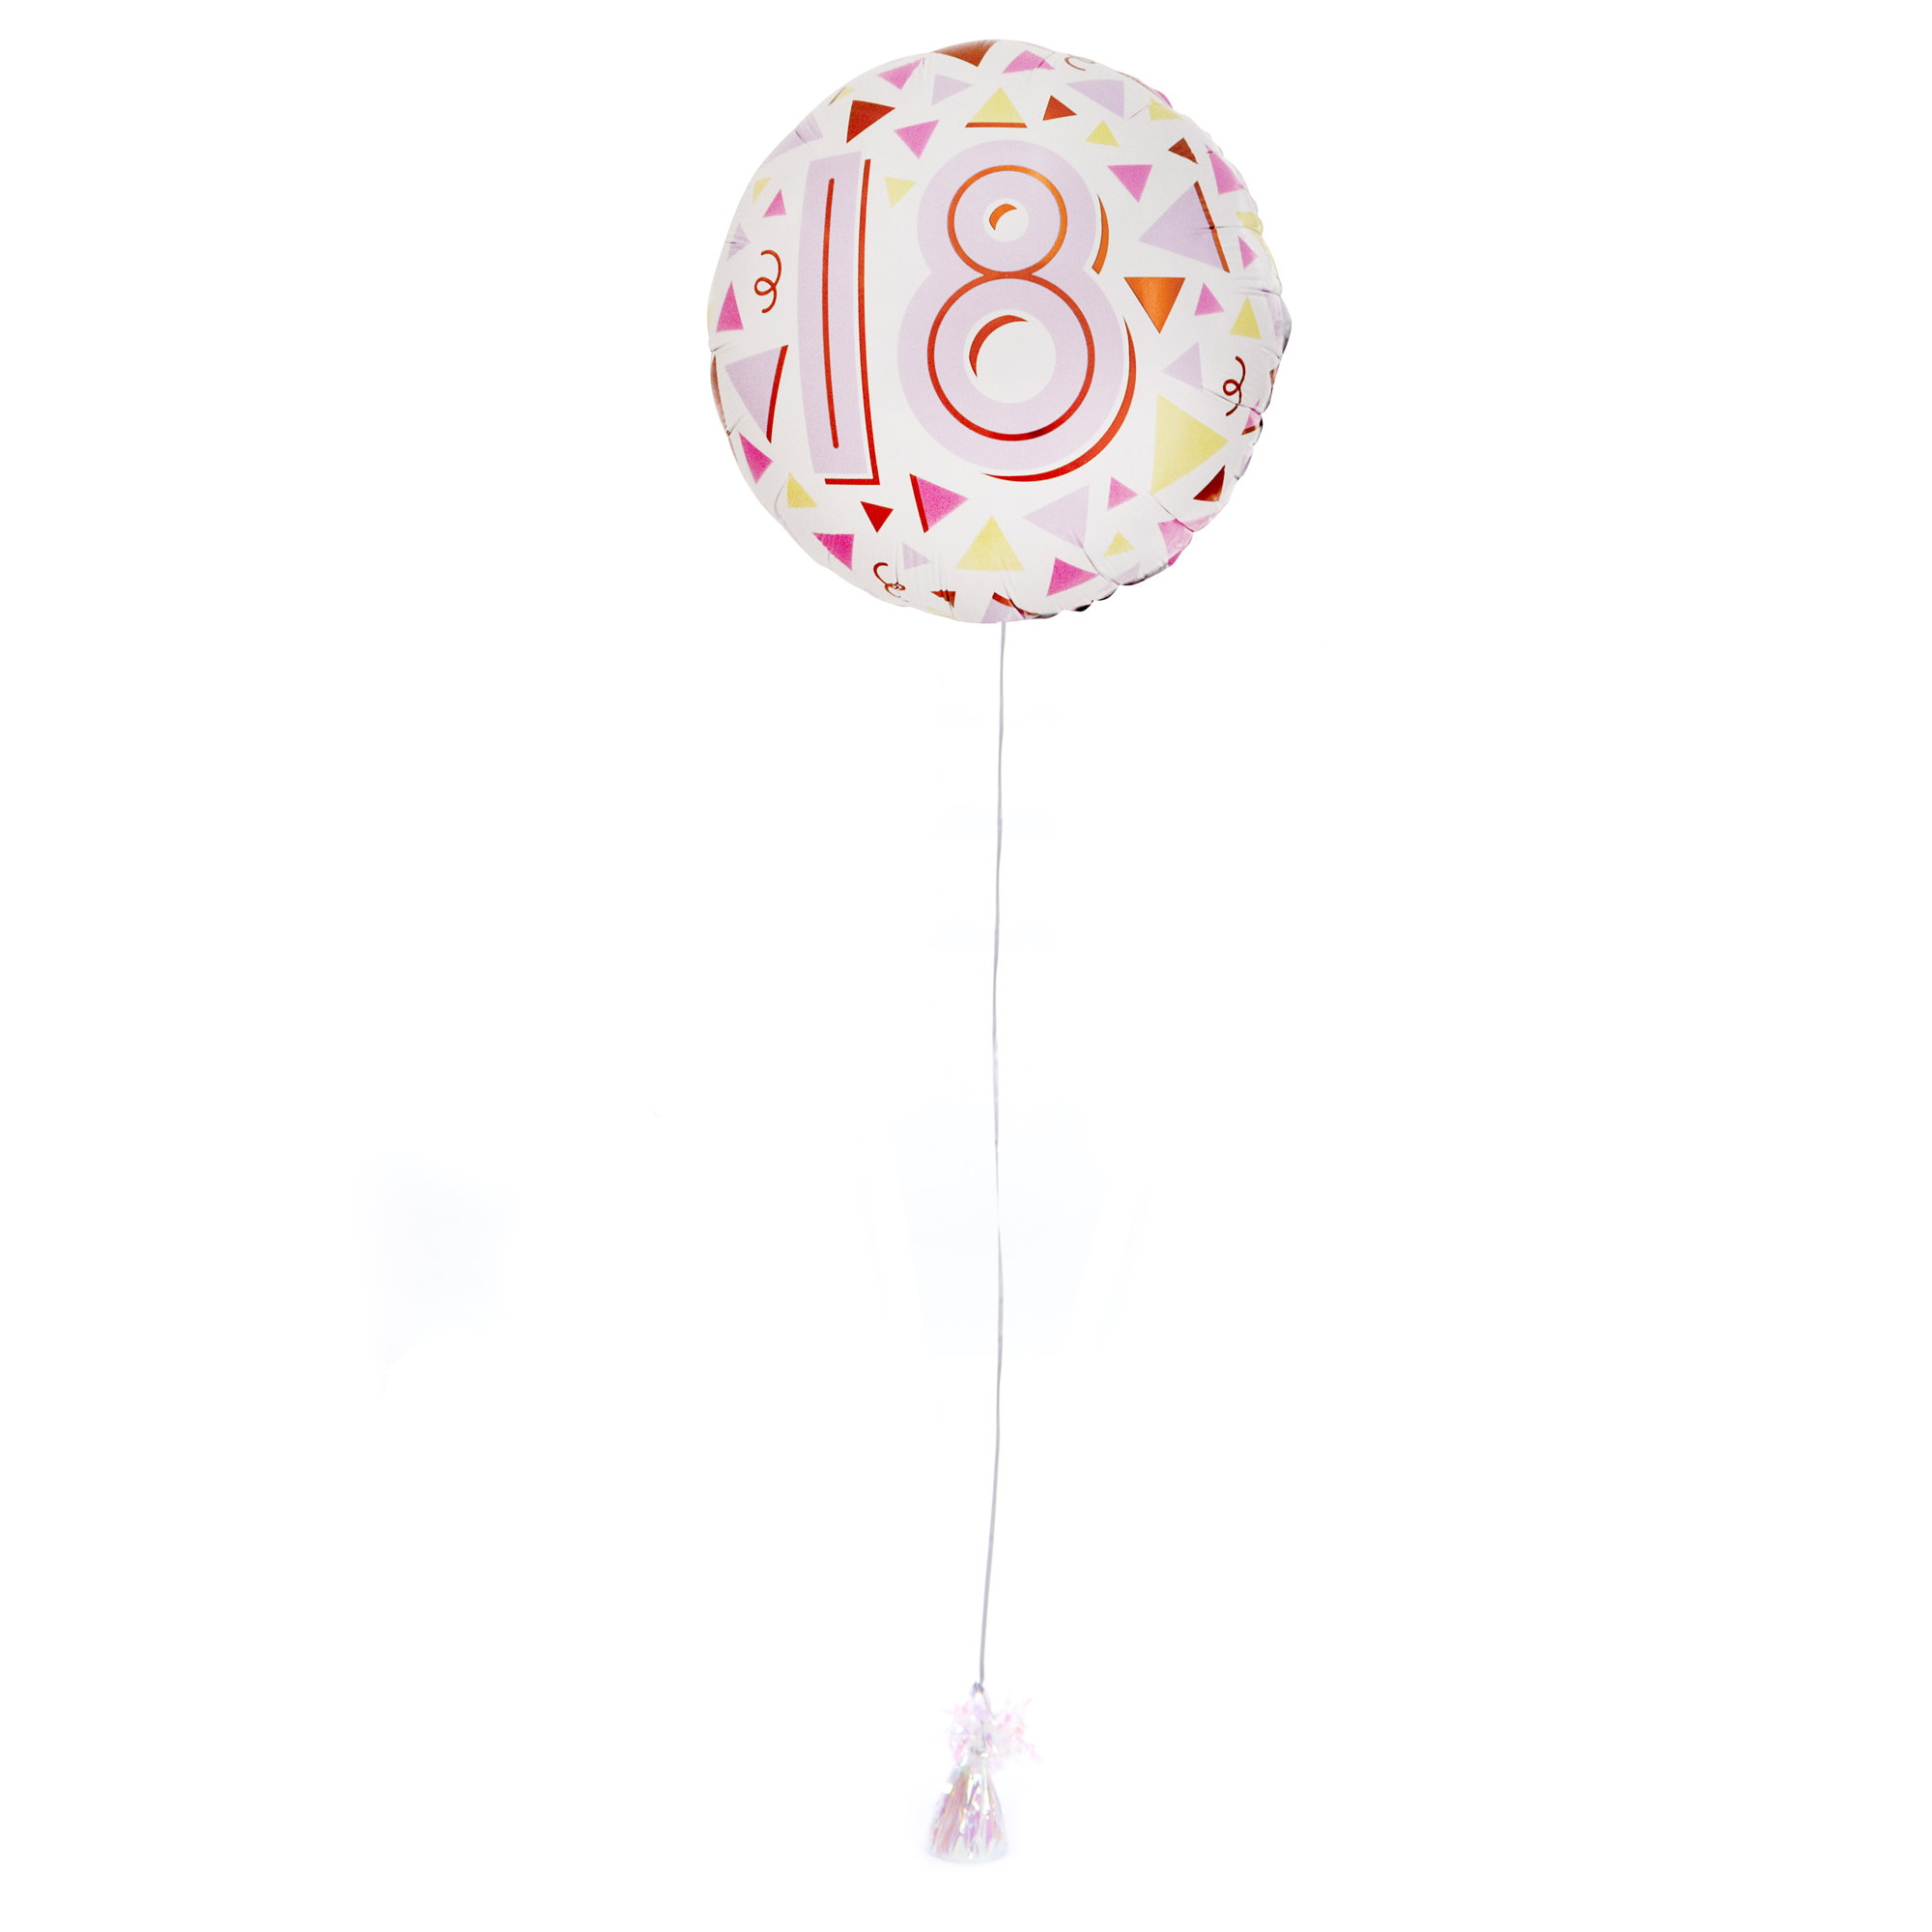 Pastel Triangles 18th Birthday Balloon & Lindt Chocolates - FREE GIFT CARD!